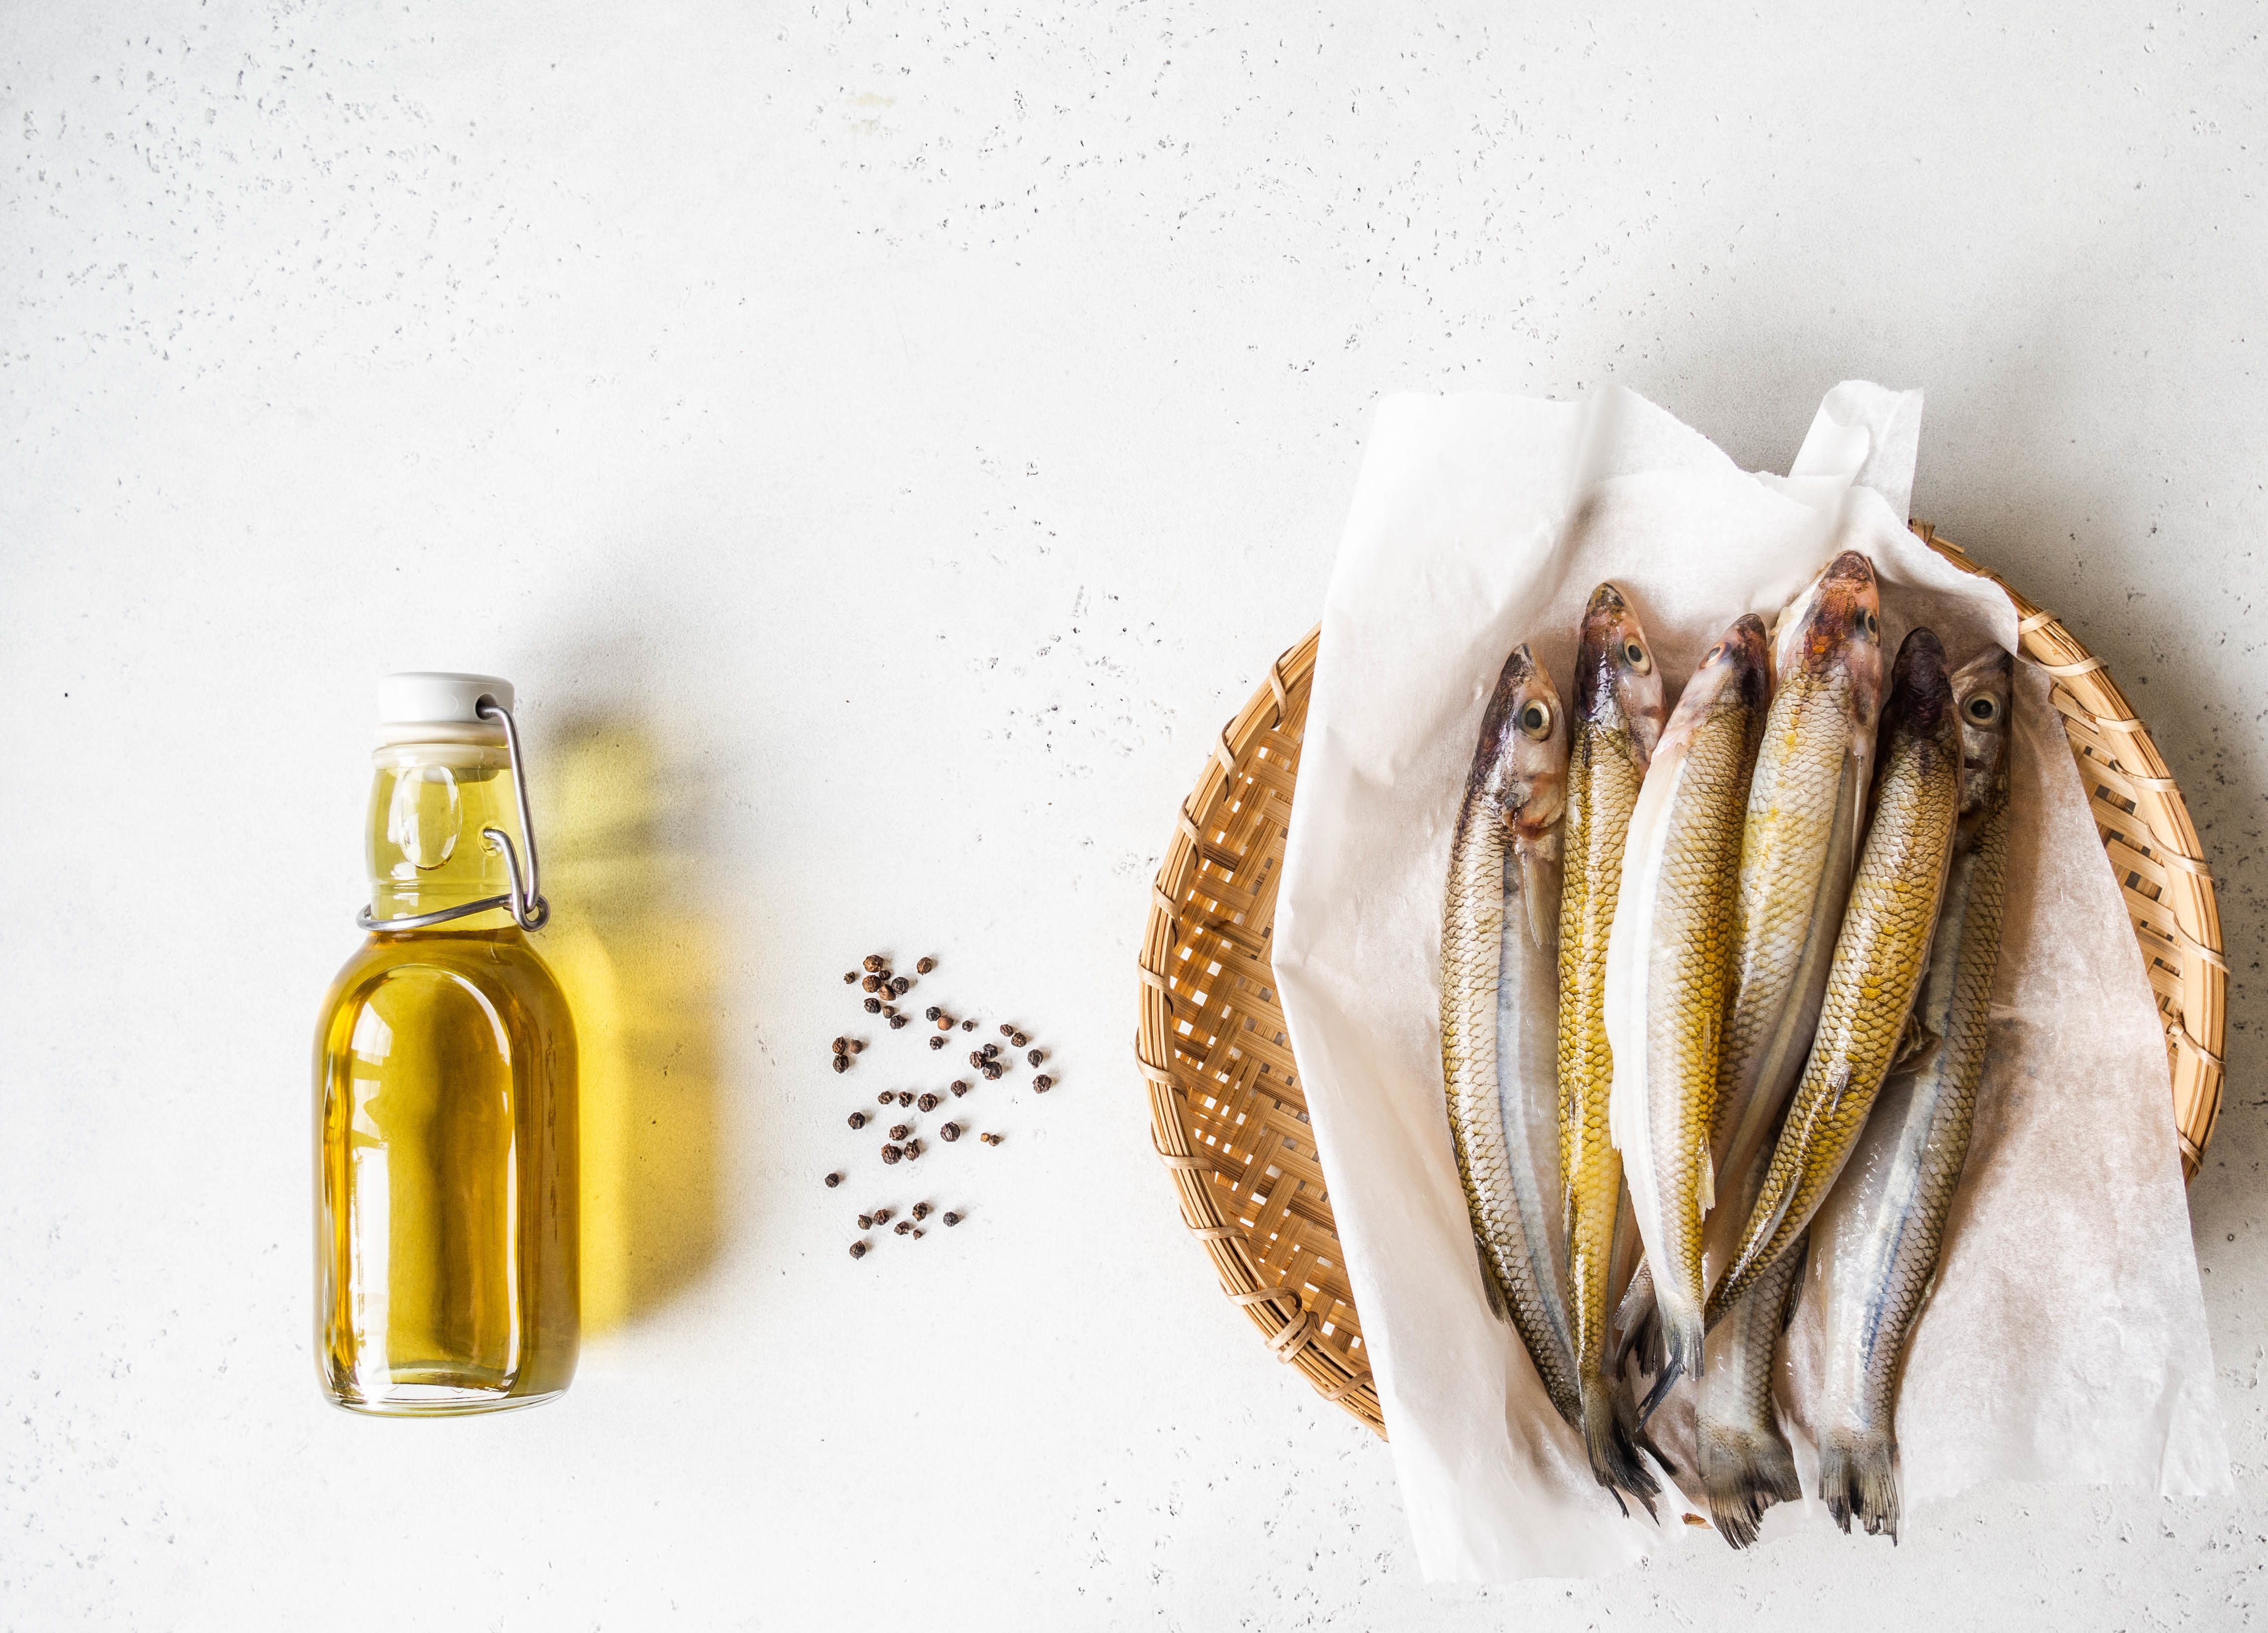 FUNIBER-fresh-raw-smelt-fish-on-wicker-tray-spice-and-olive-oil-in-bottle-on-a-wind-background-